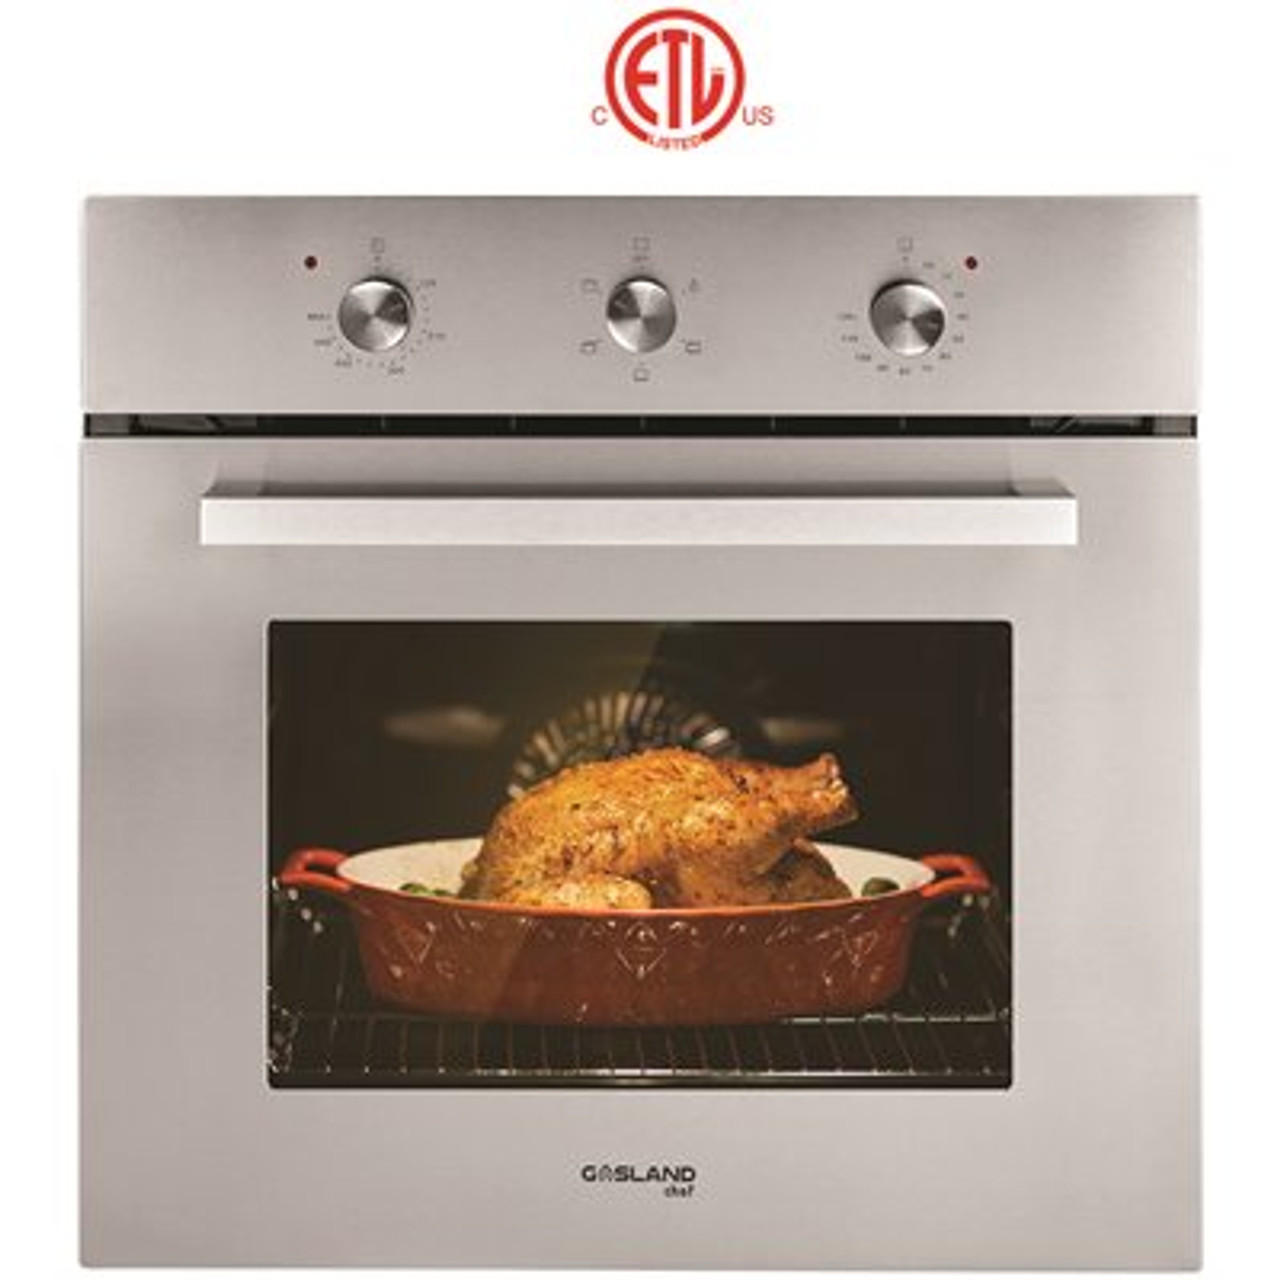 GASLAND Chef 24 in. Built-In Single Electric Wall Oven in Stainless Steel ETL certified